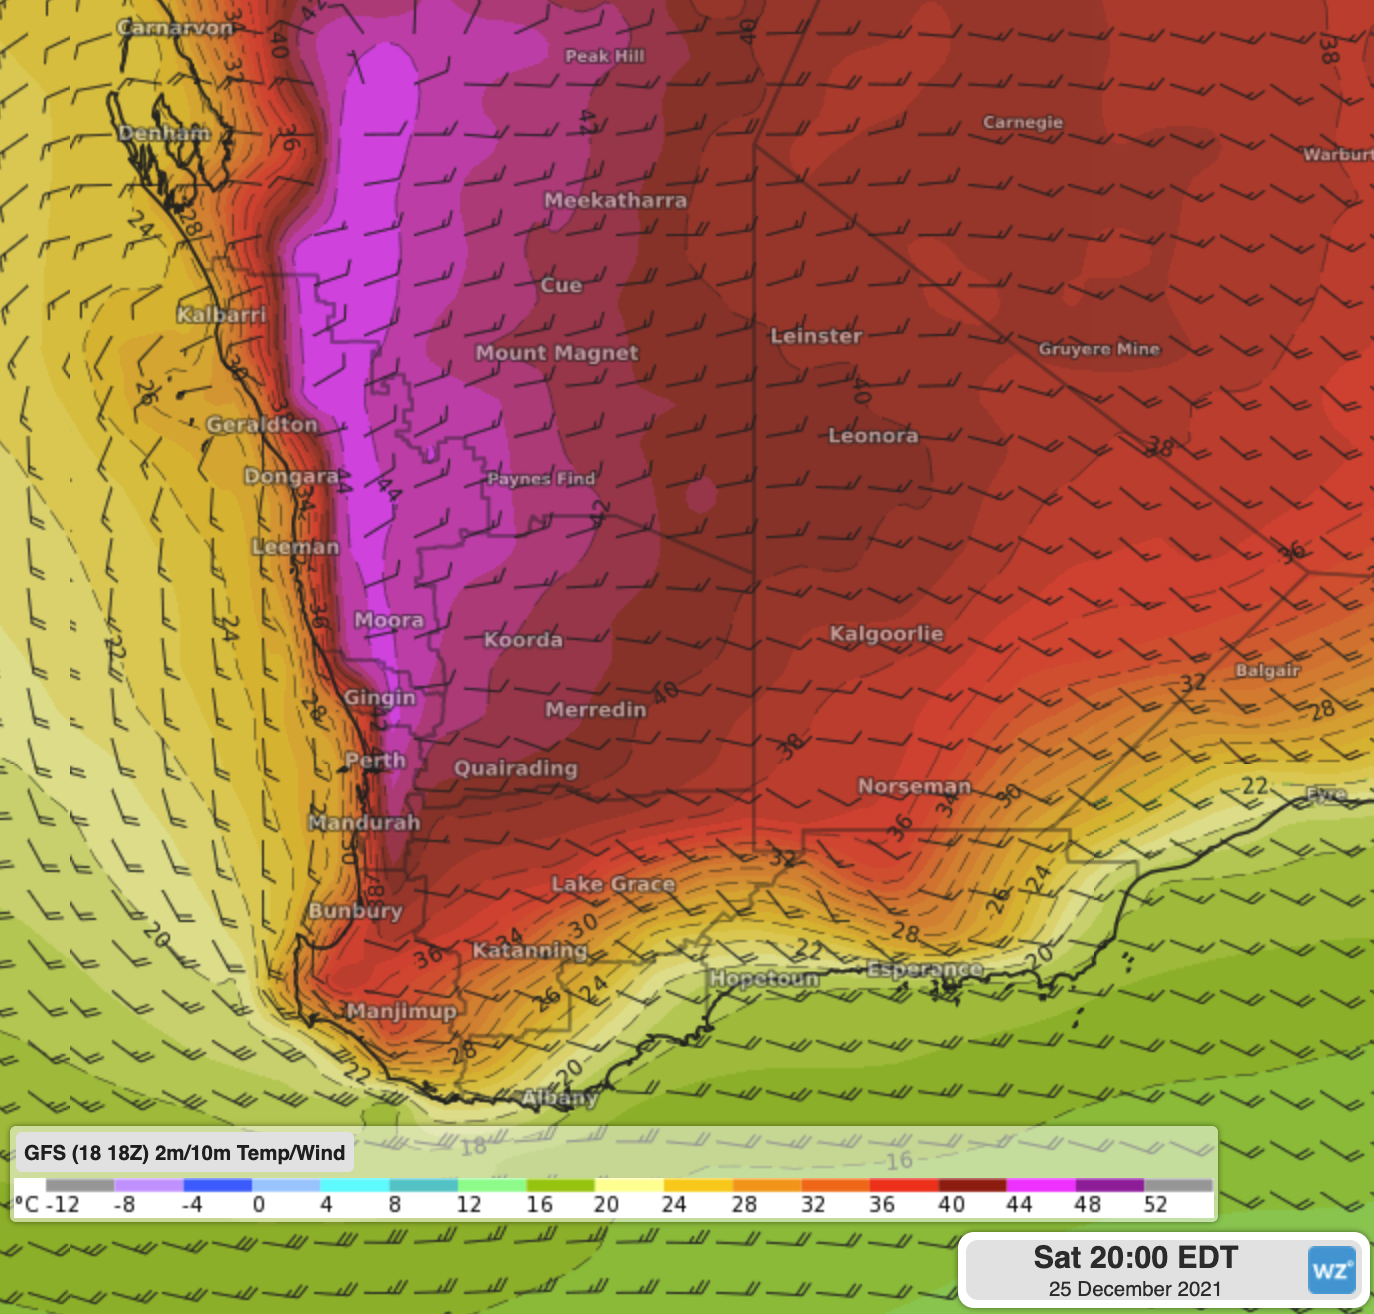 Western Australia looks set for a very hot lead up to Christmas 